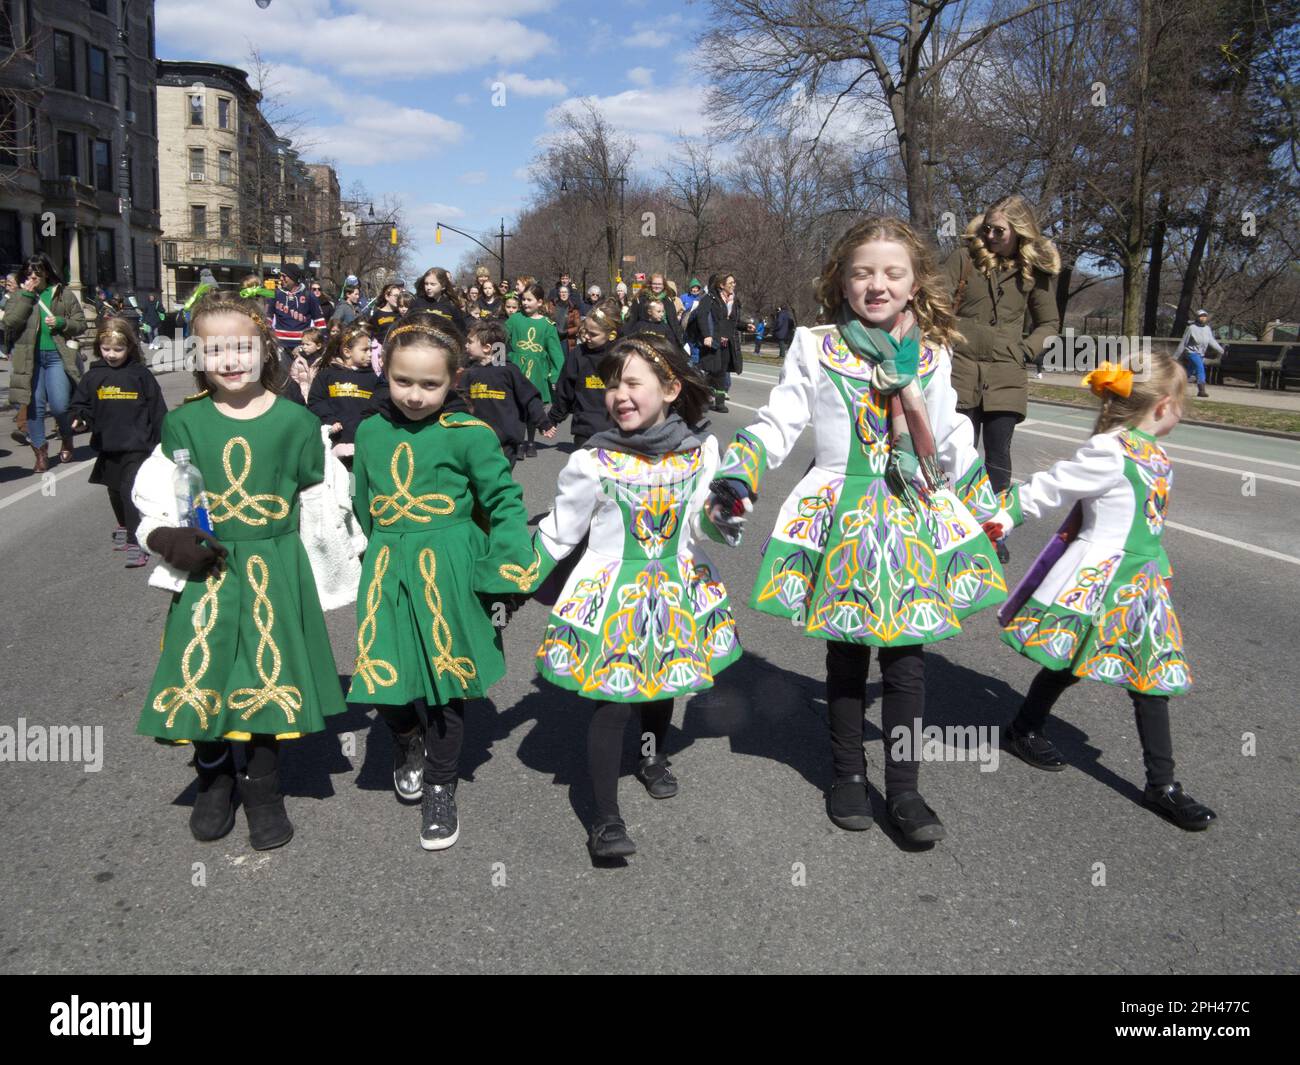 Students from Irish Dancing school at St.Patrick's Day Parade in Park Slope, Brooklyn, NY Stock Photo